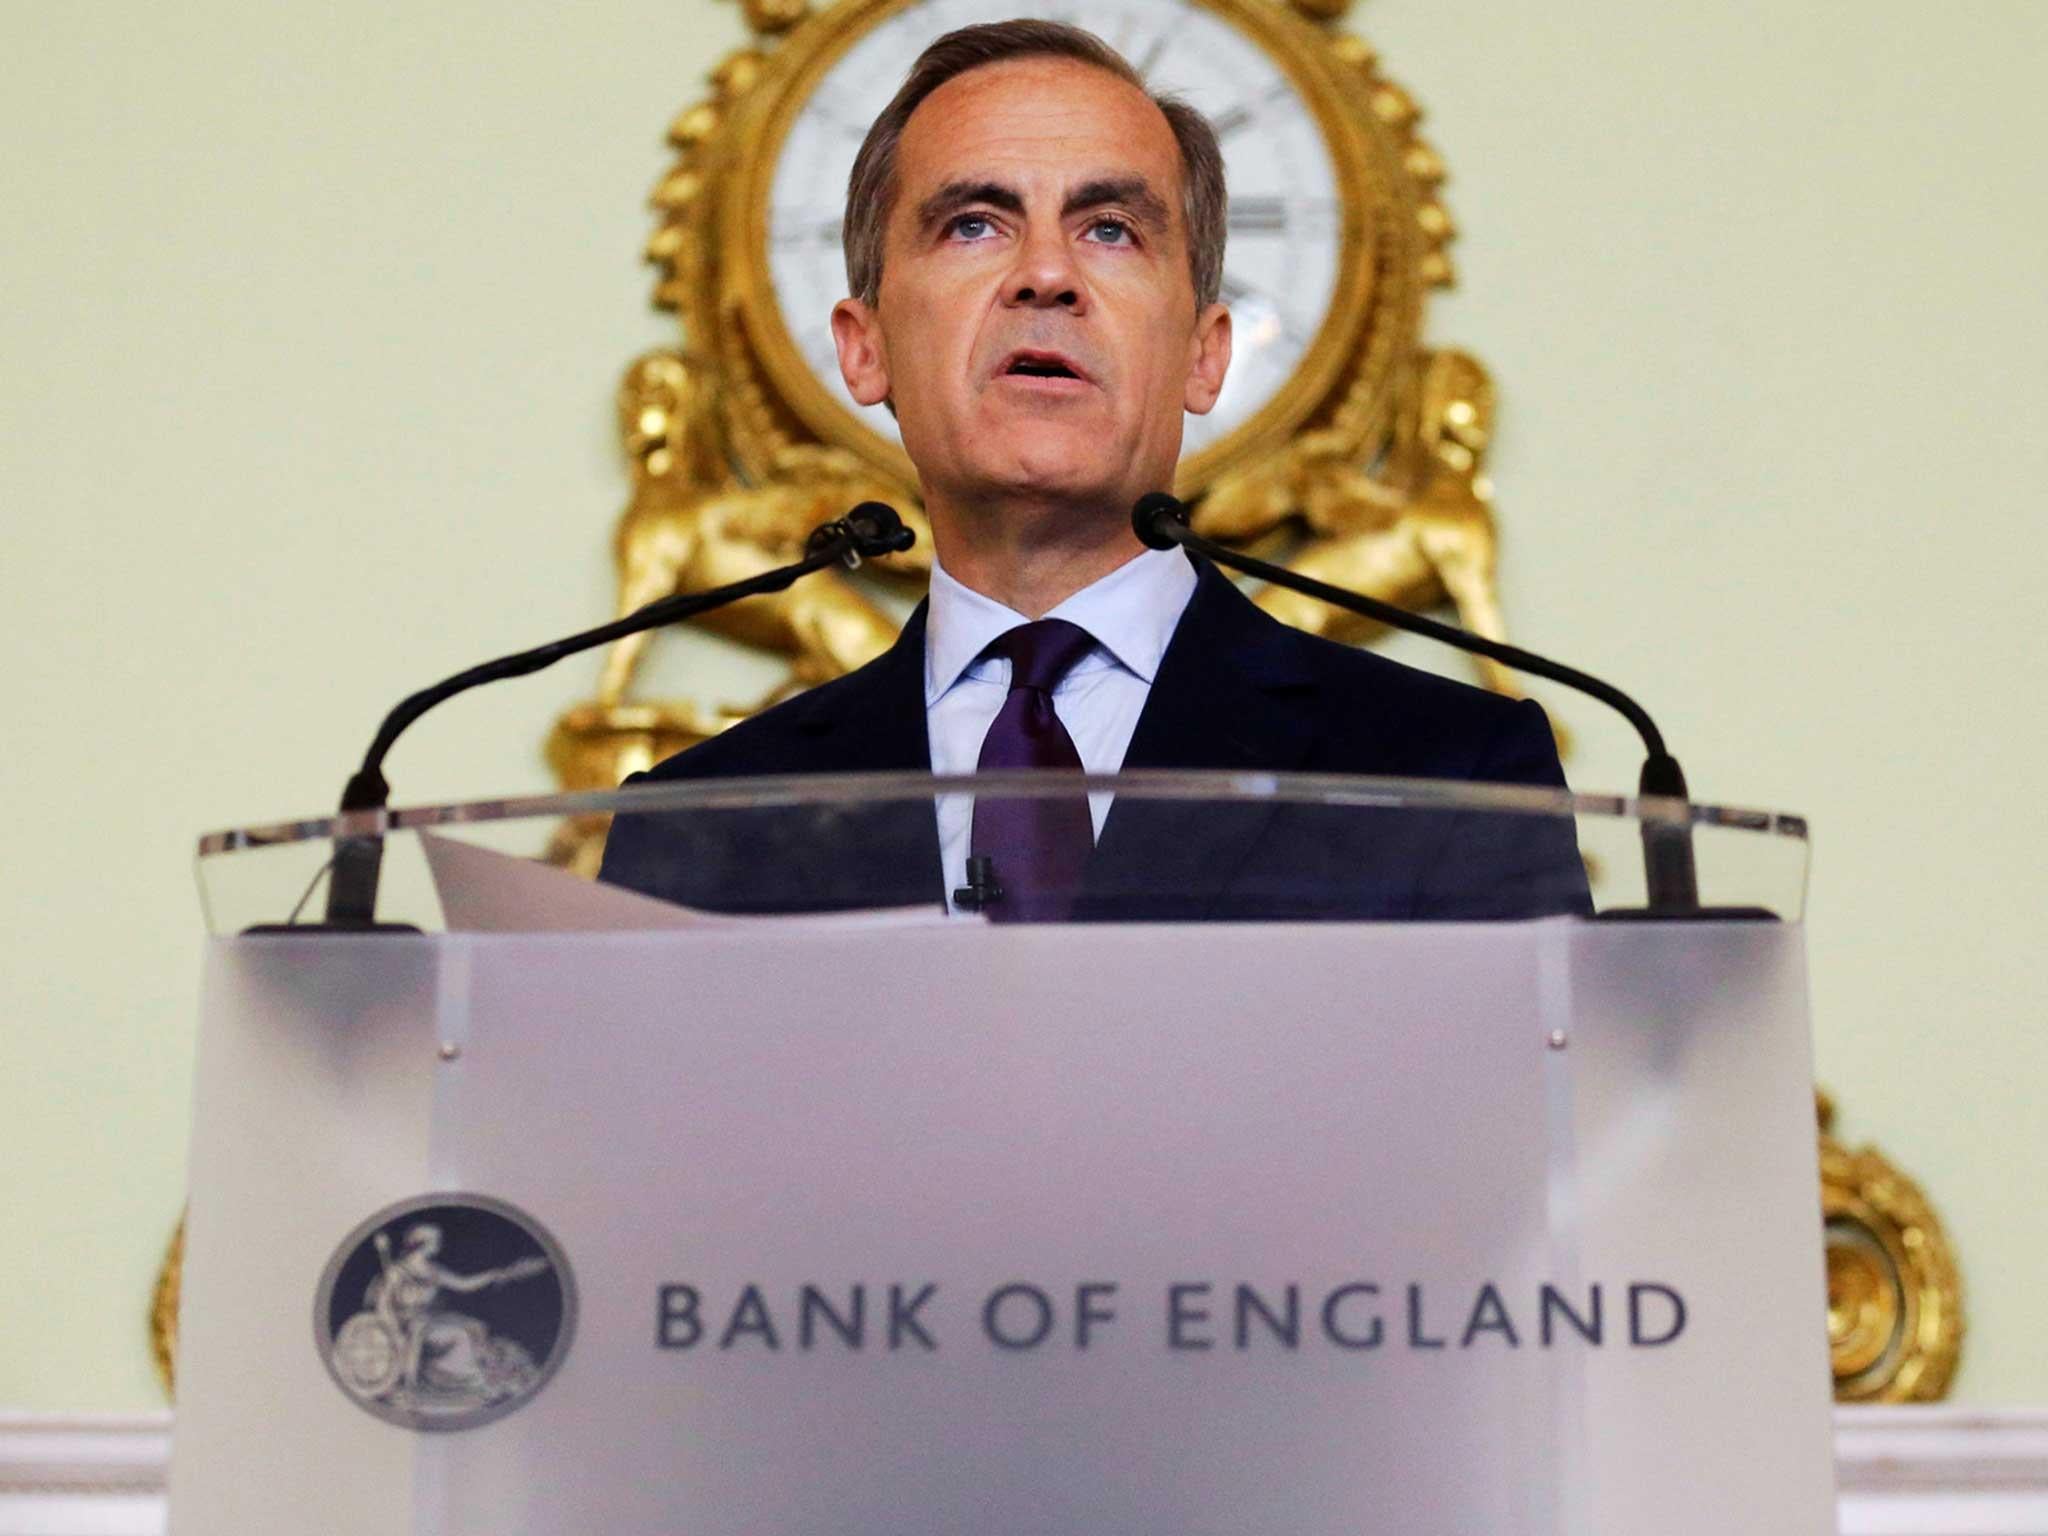 The governor of the Bank of England Mark Carney gives a press conference, his first since the leave result of the European Union referendum